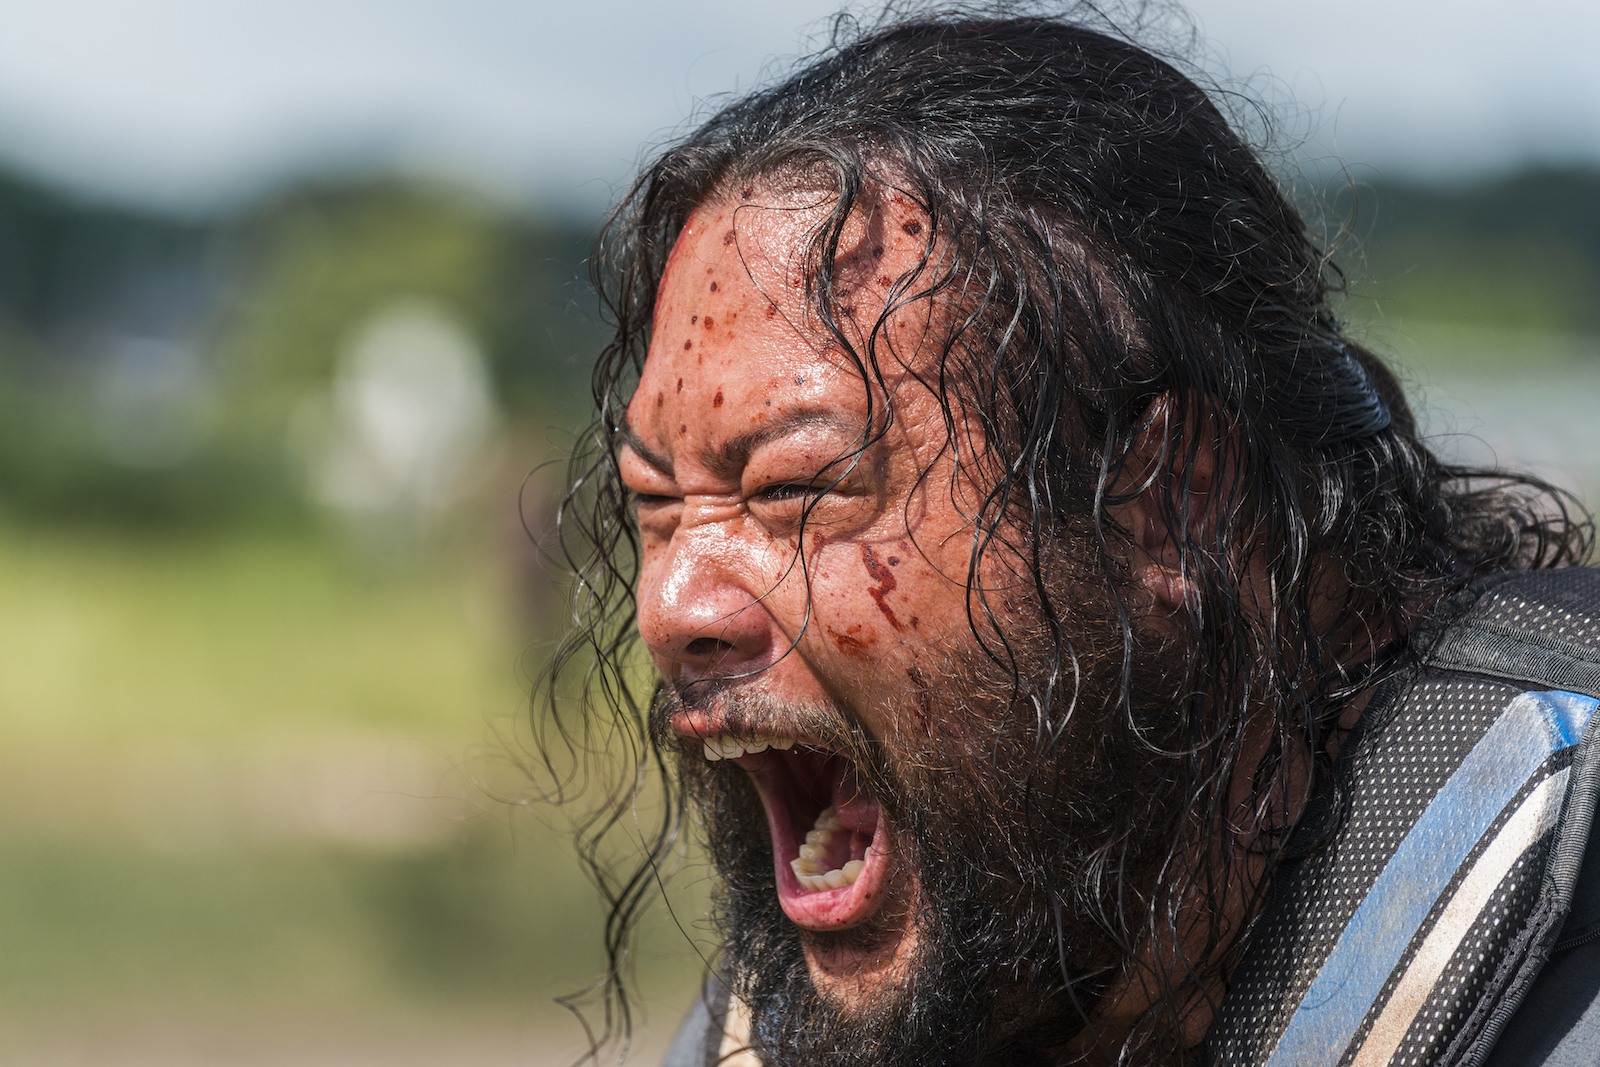 Ezekiel Has An Extremely Bad Day On A Pretty Darned Good Walking Dead